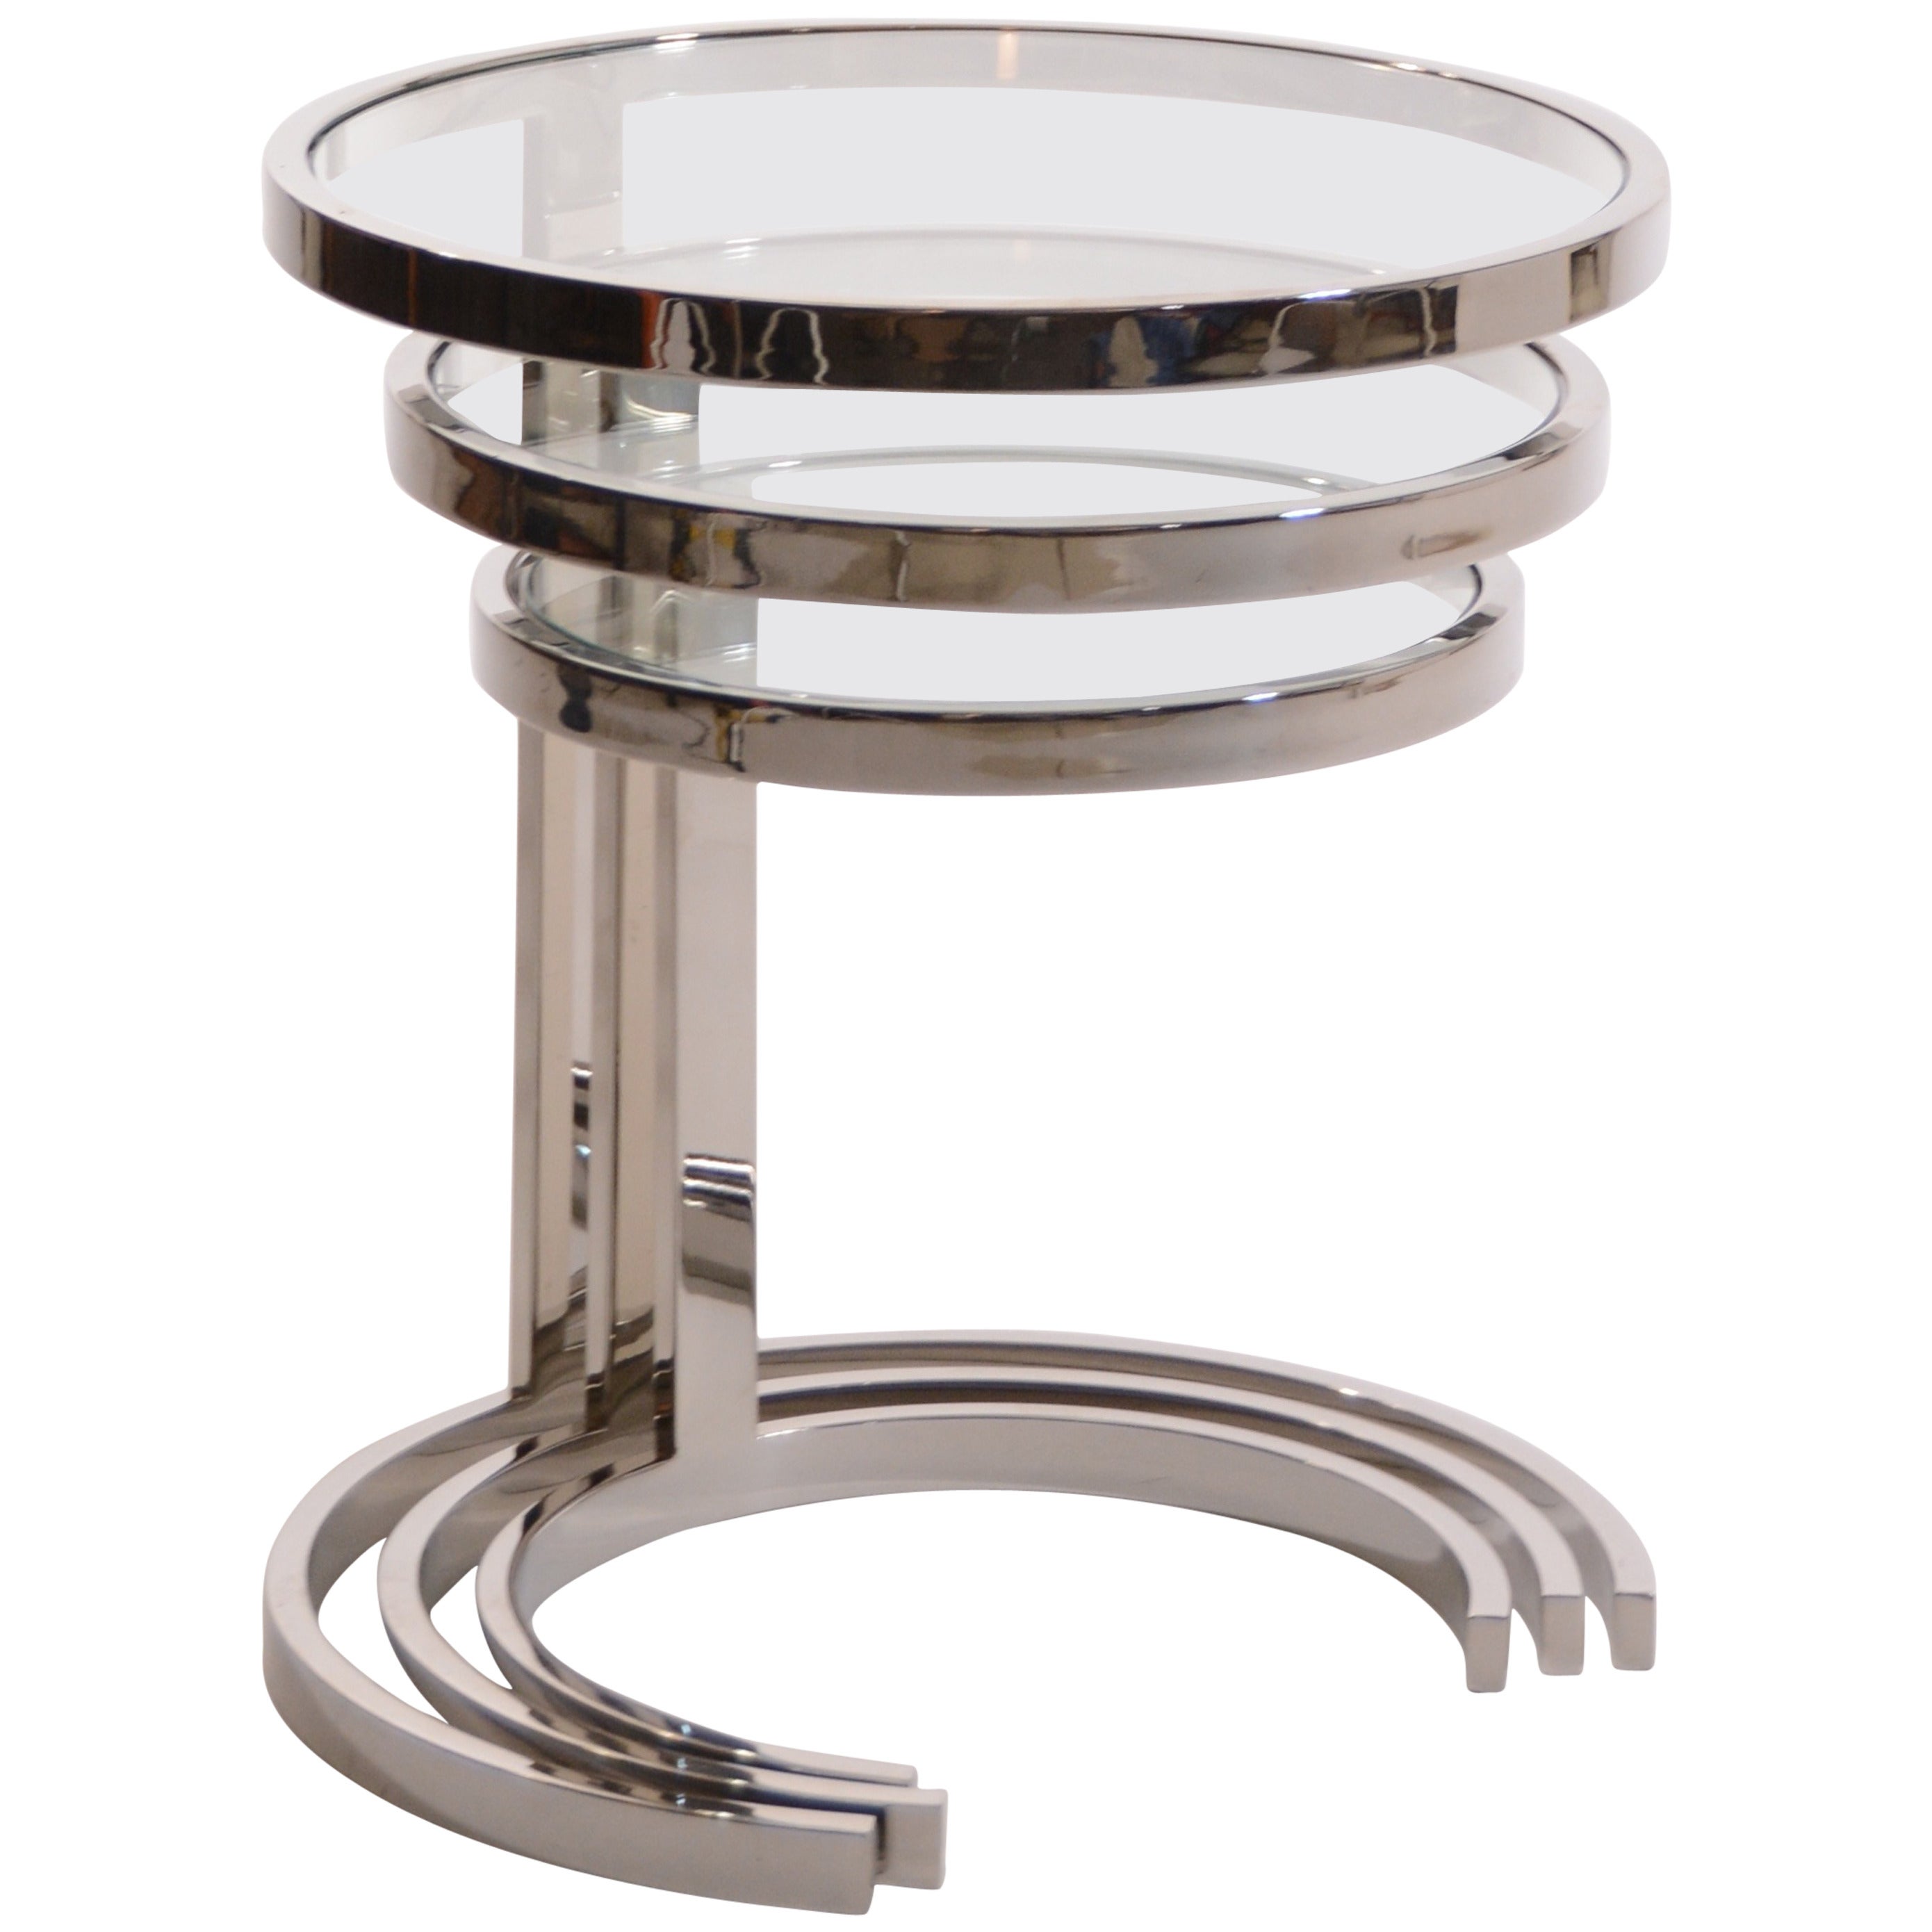 Set of 3 Nesting Stainless Steel and Glass Nesting Tables by Brueton